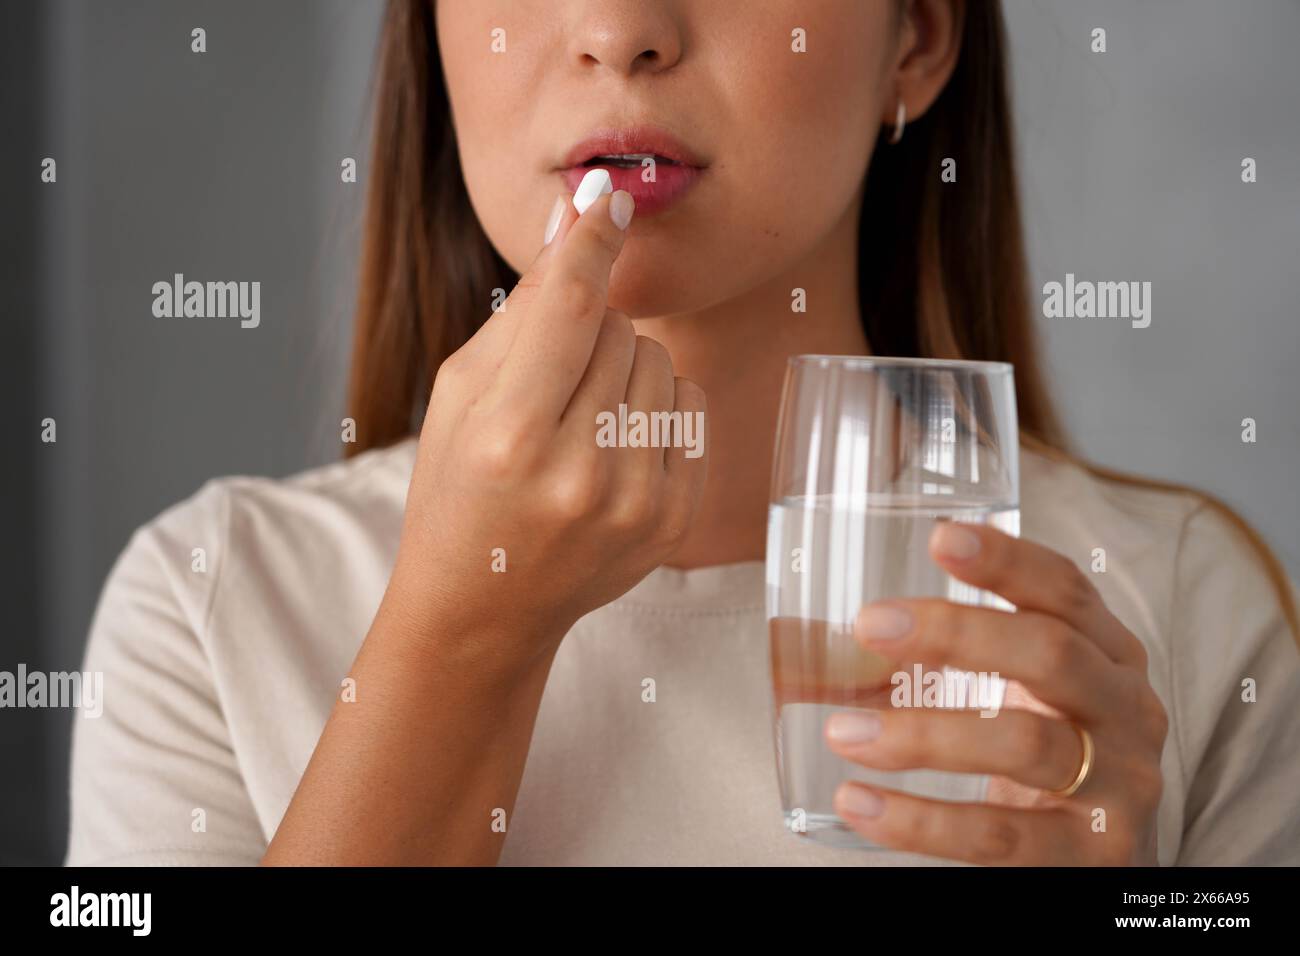 Young woman takes a pill while holding a glass of water in her hand Stock Photo